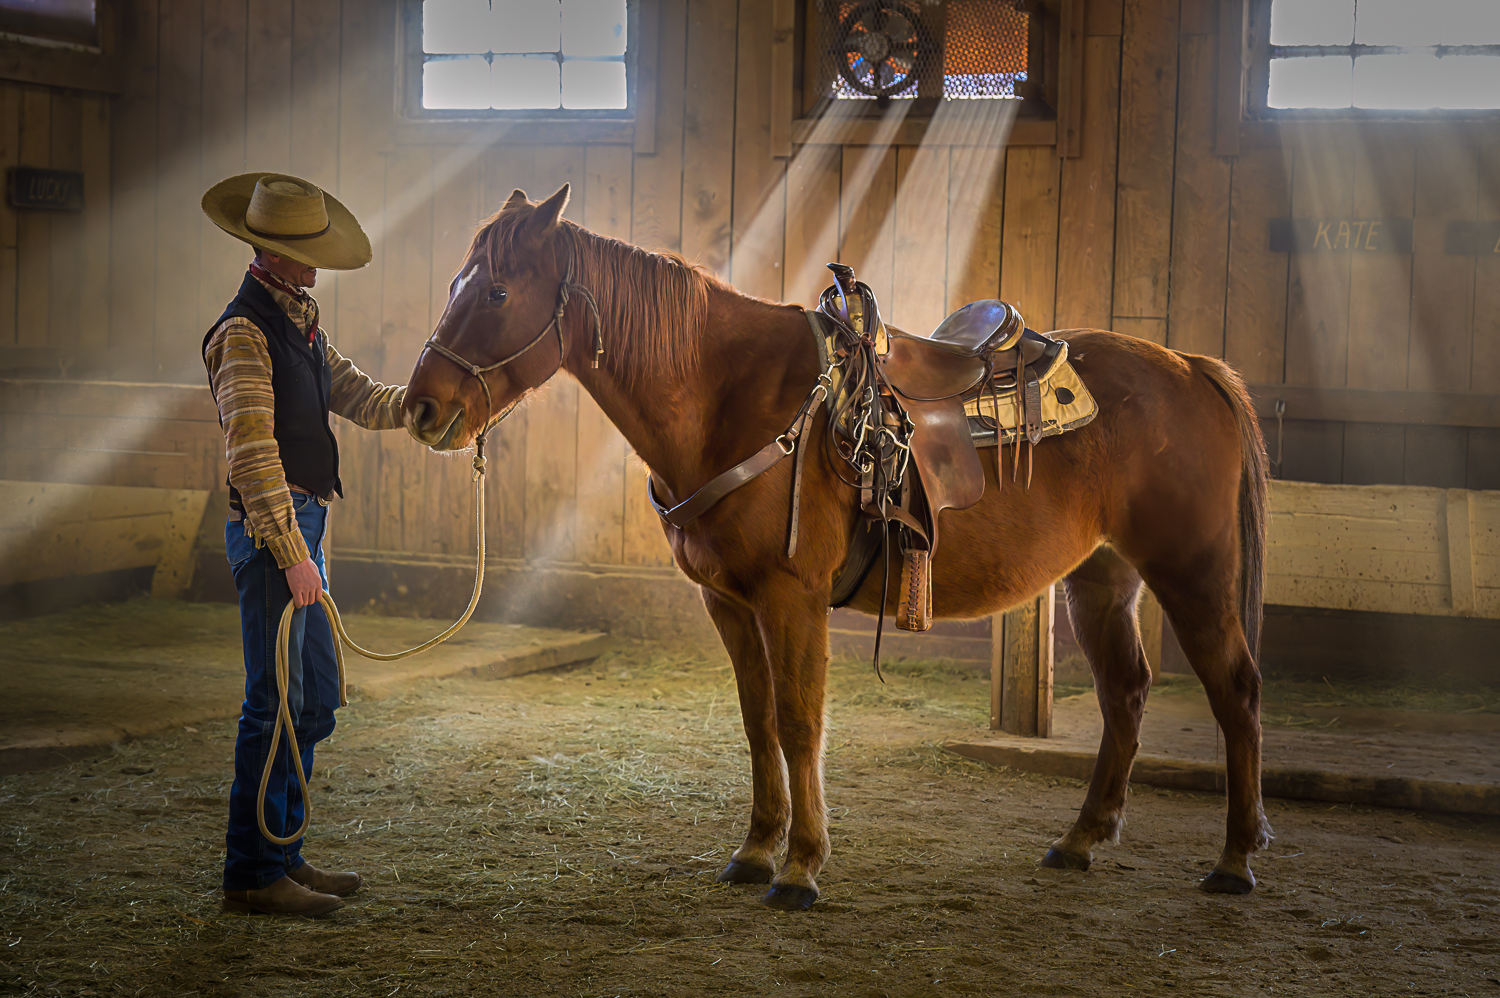 Cowboy facing brown horse, holding the reins. Rays of sunlight stream through the windows behind the man and horse.